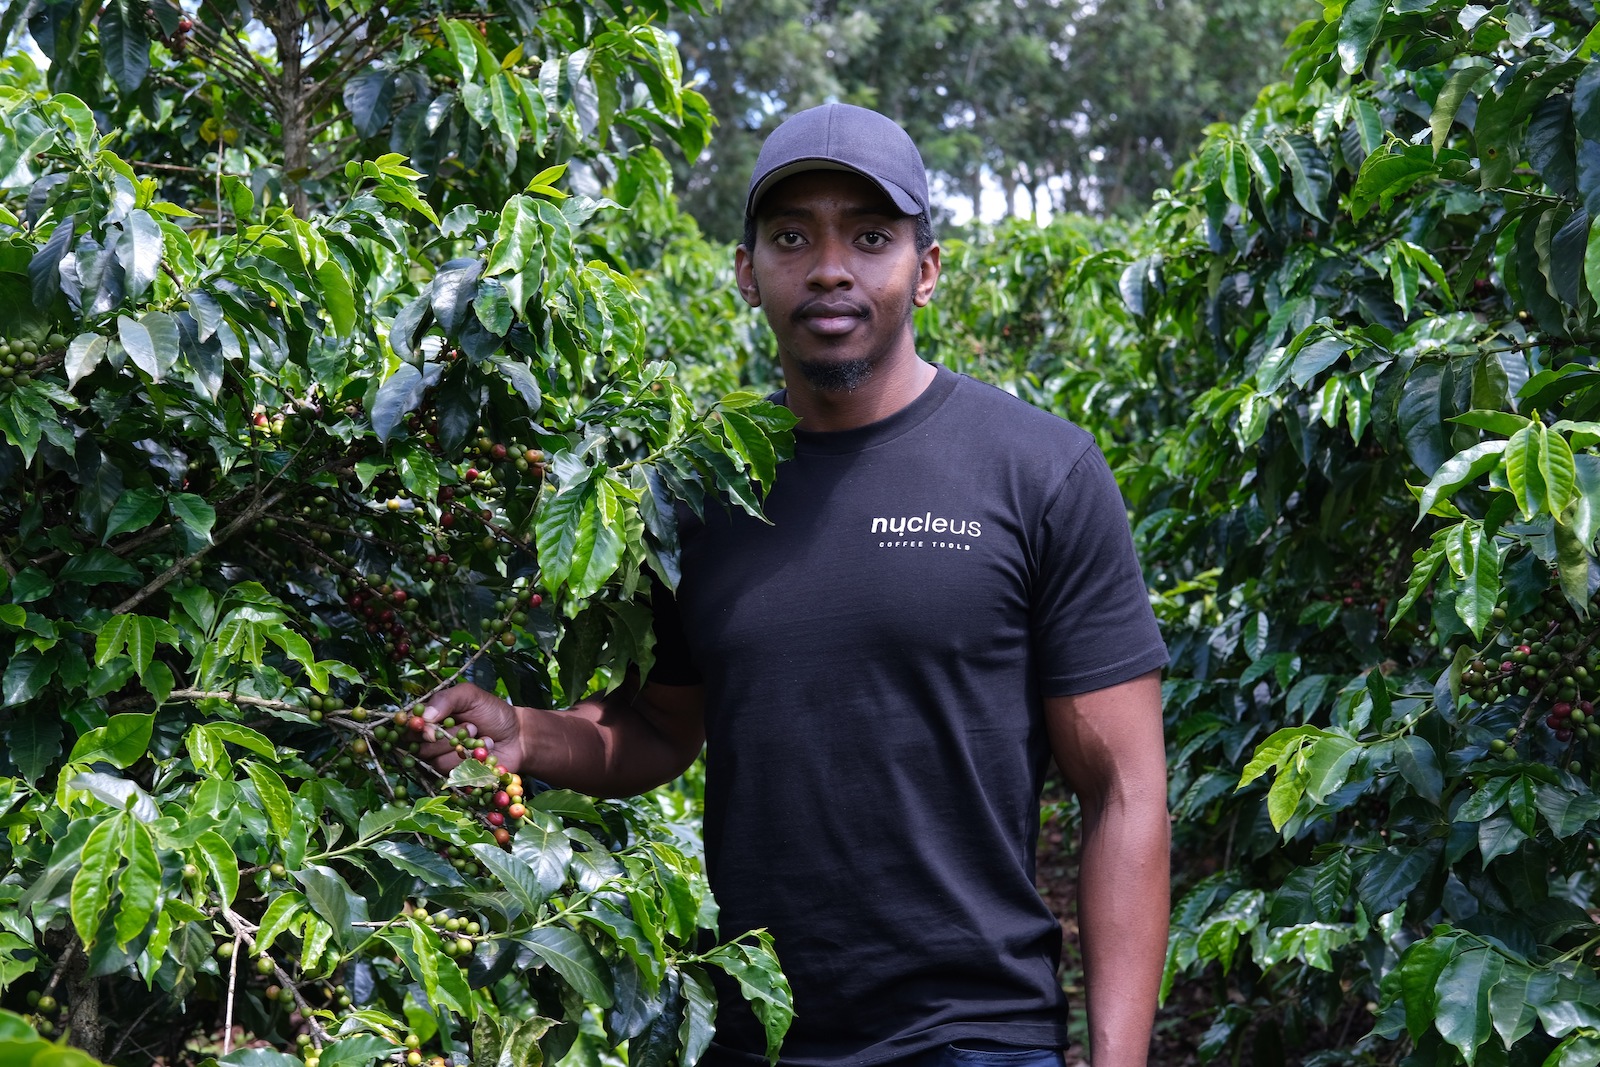 A man wearing a black baseball cap and black t-shirt looks directly at the camera as he stands among lush green shrubs, his hand cradling some of their red berries